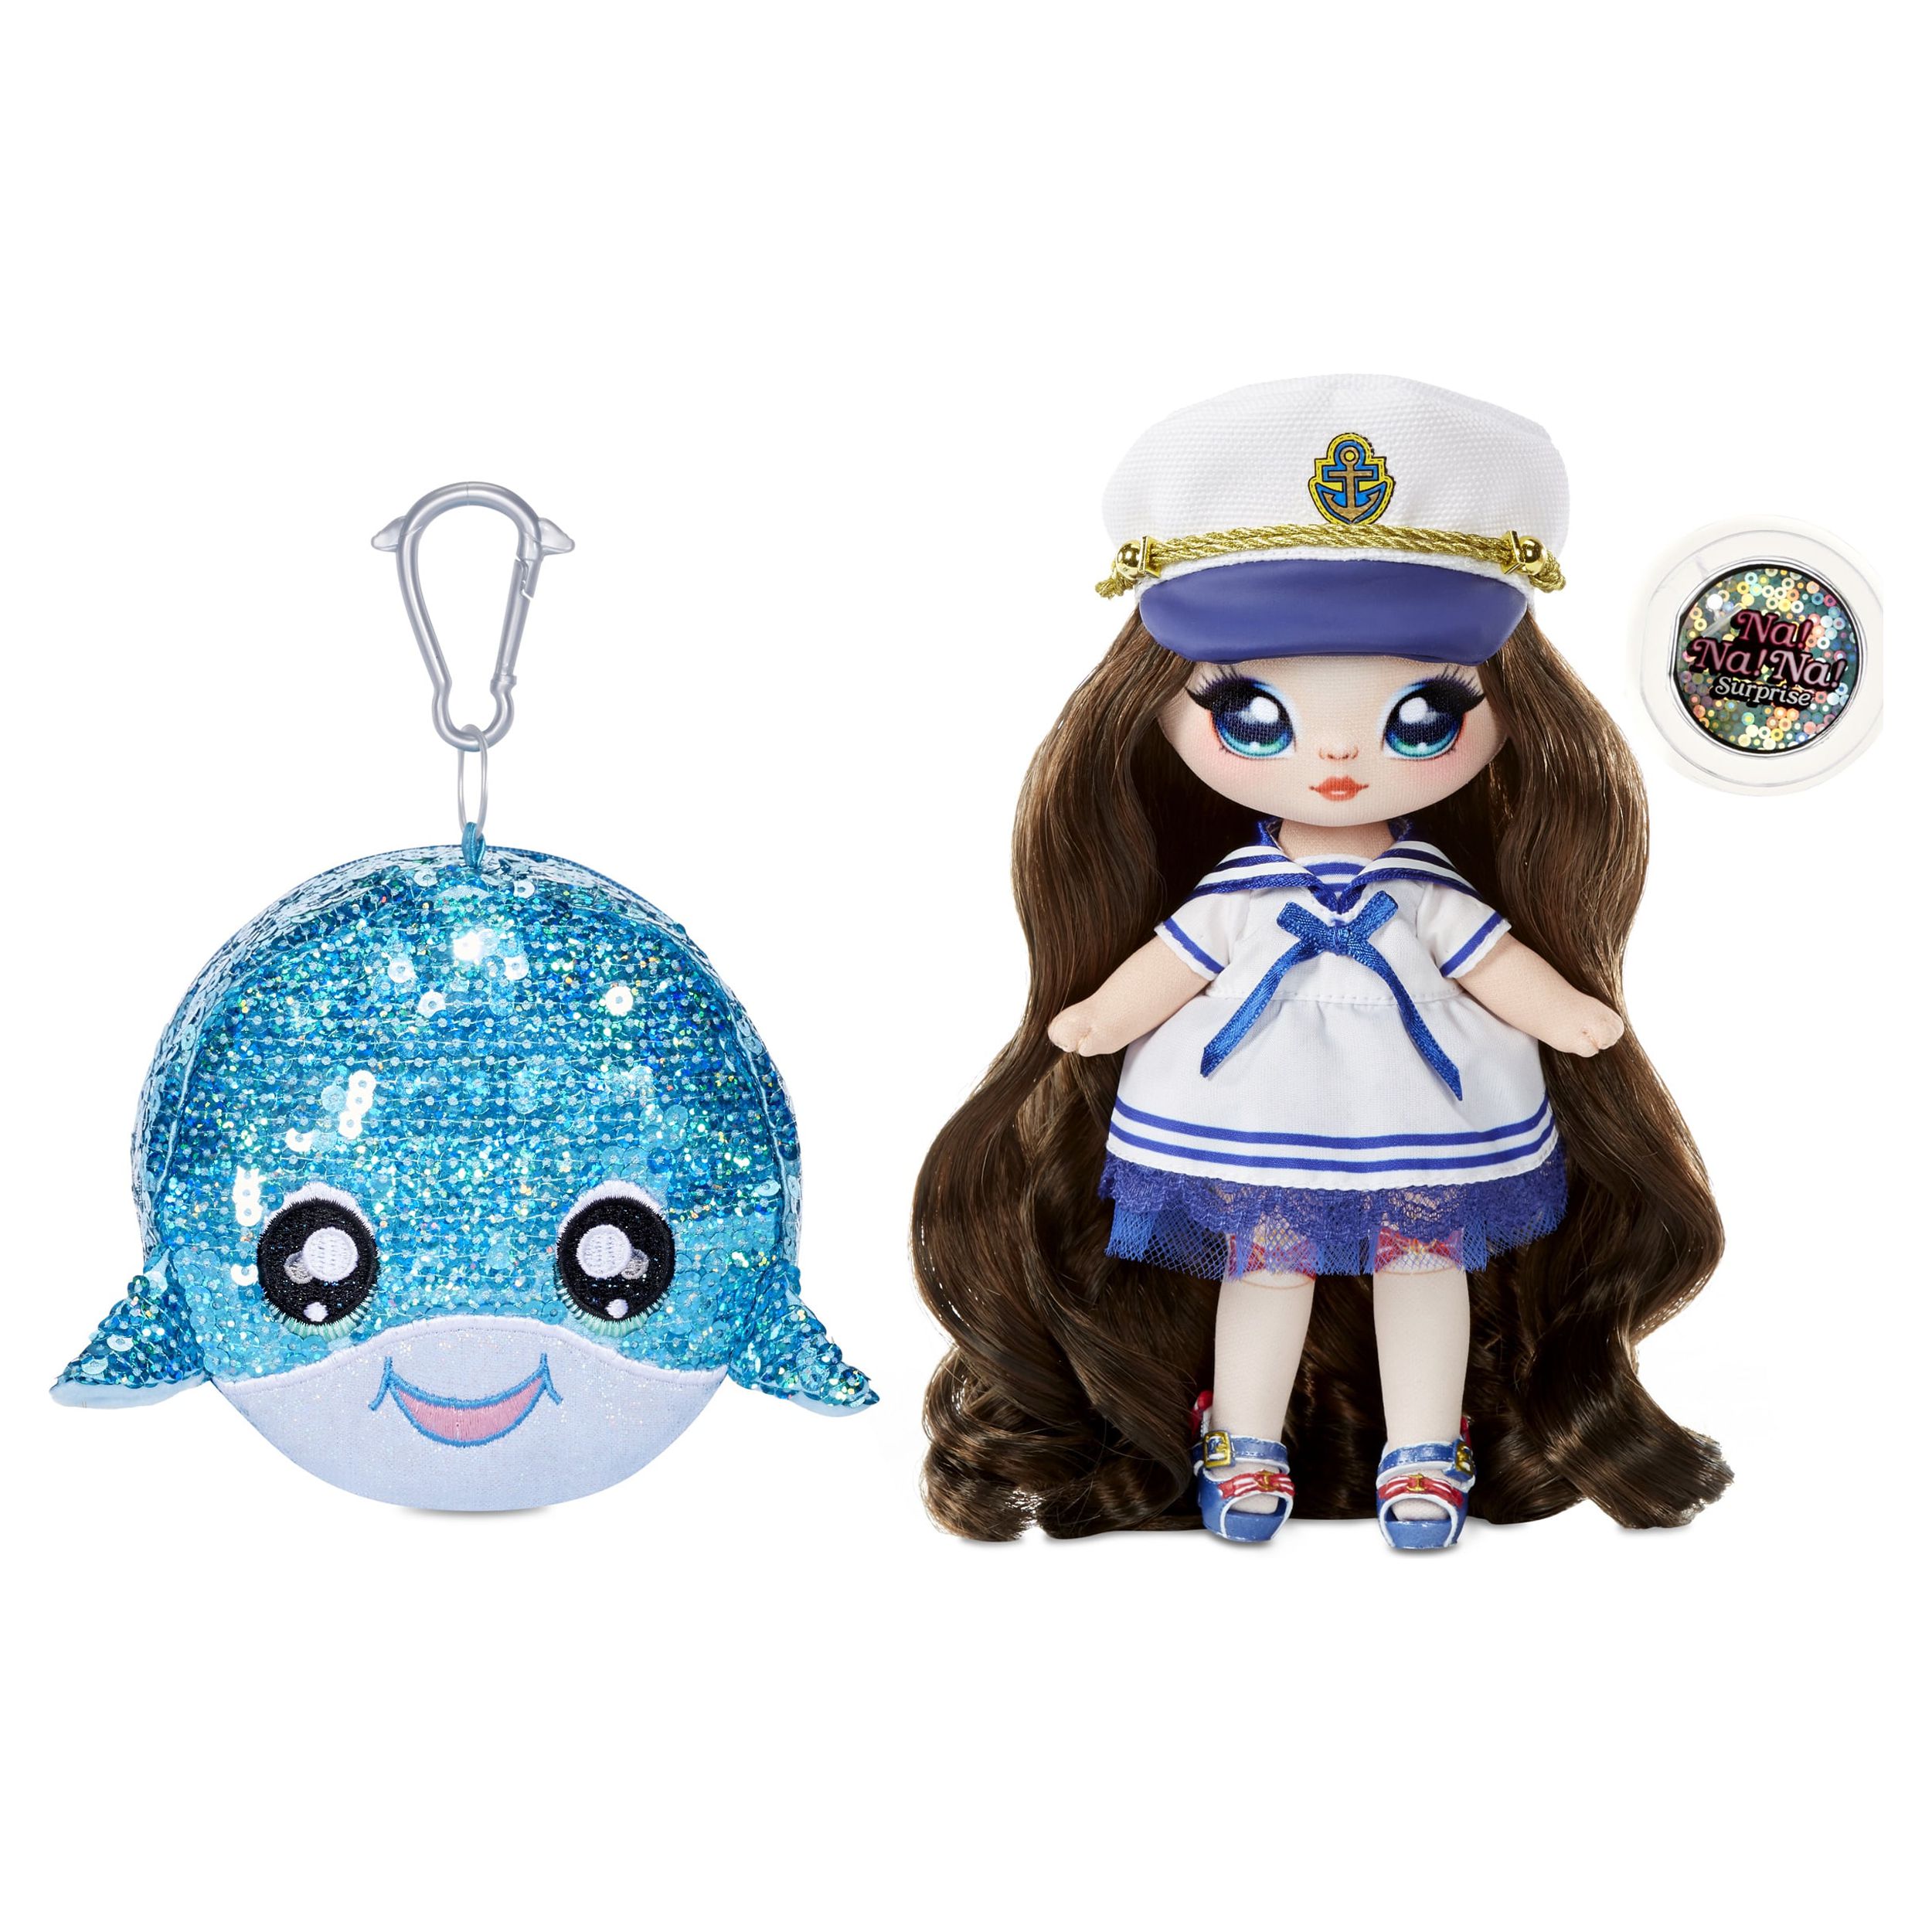 Na! Na! Na! Surprise 2-in-1 Fashion Doll and Sparkly Sequined Purse Sparkle Series – Sailor Blu, 7.5" Sailor Doll - image 1 of 7